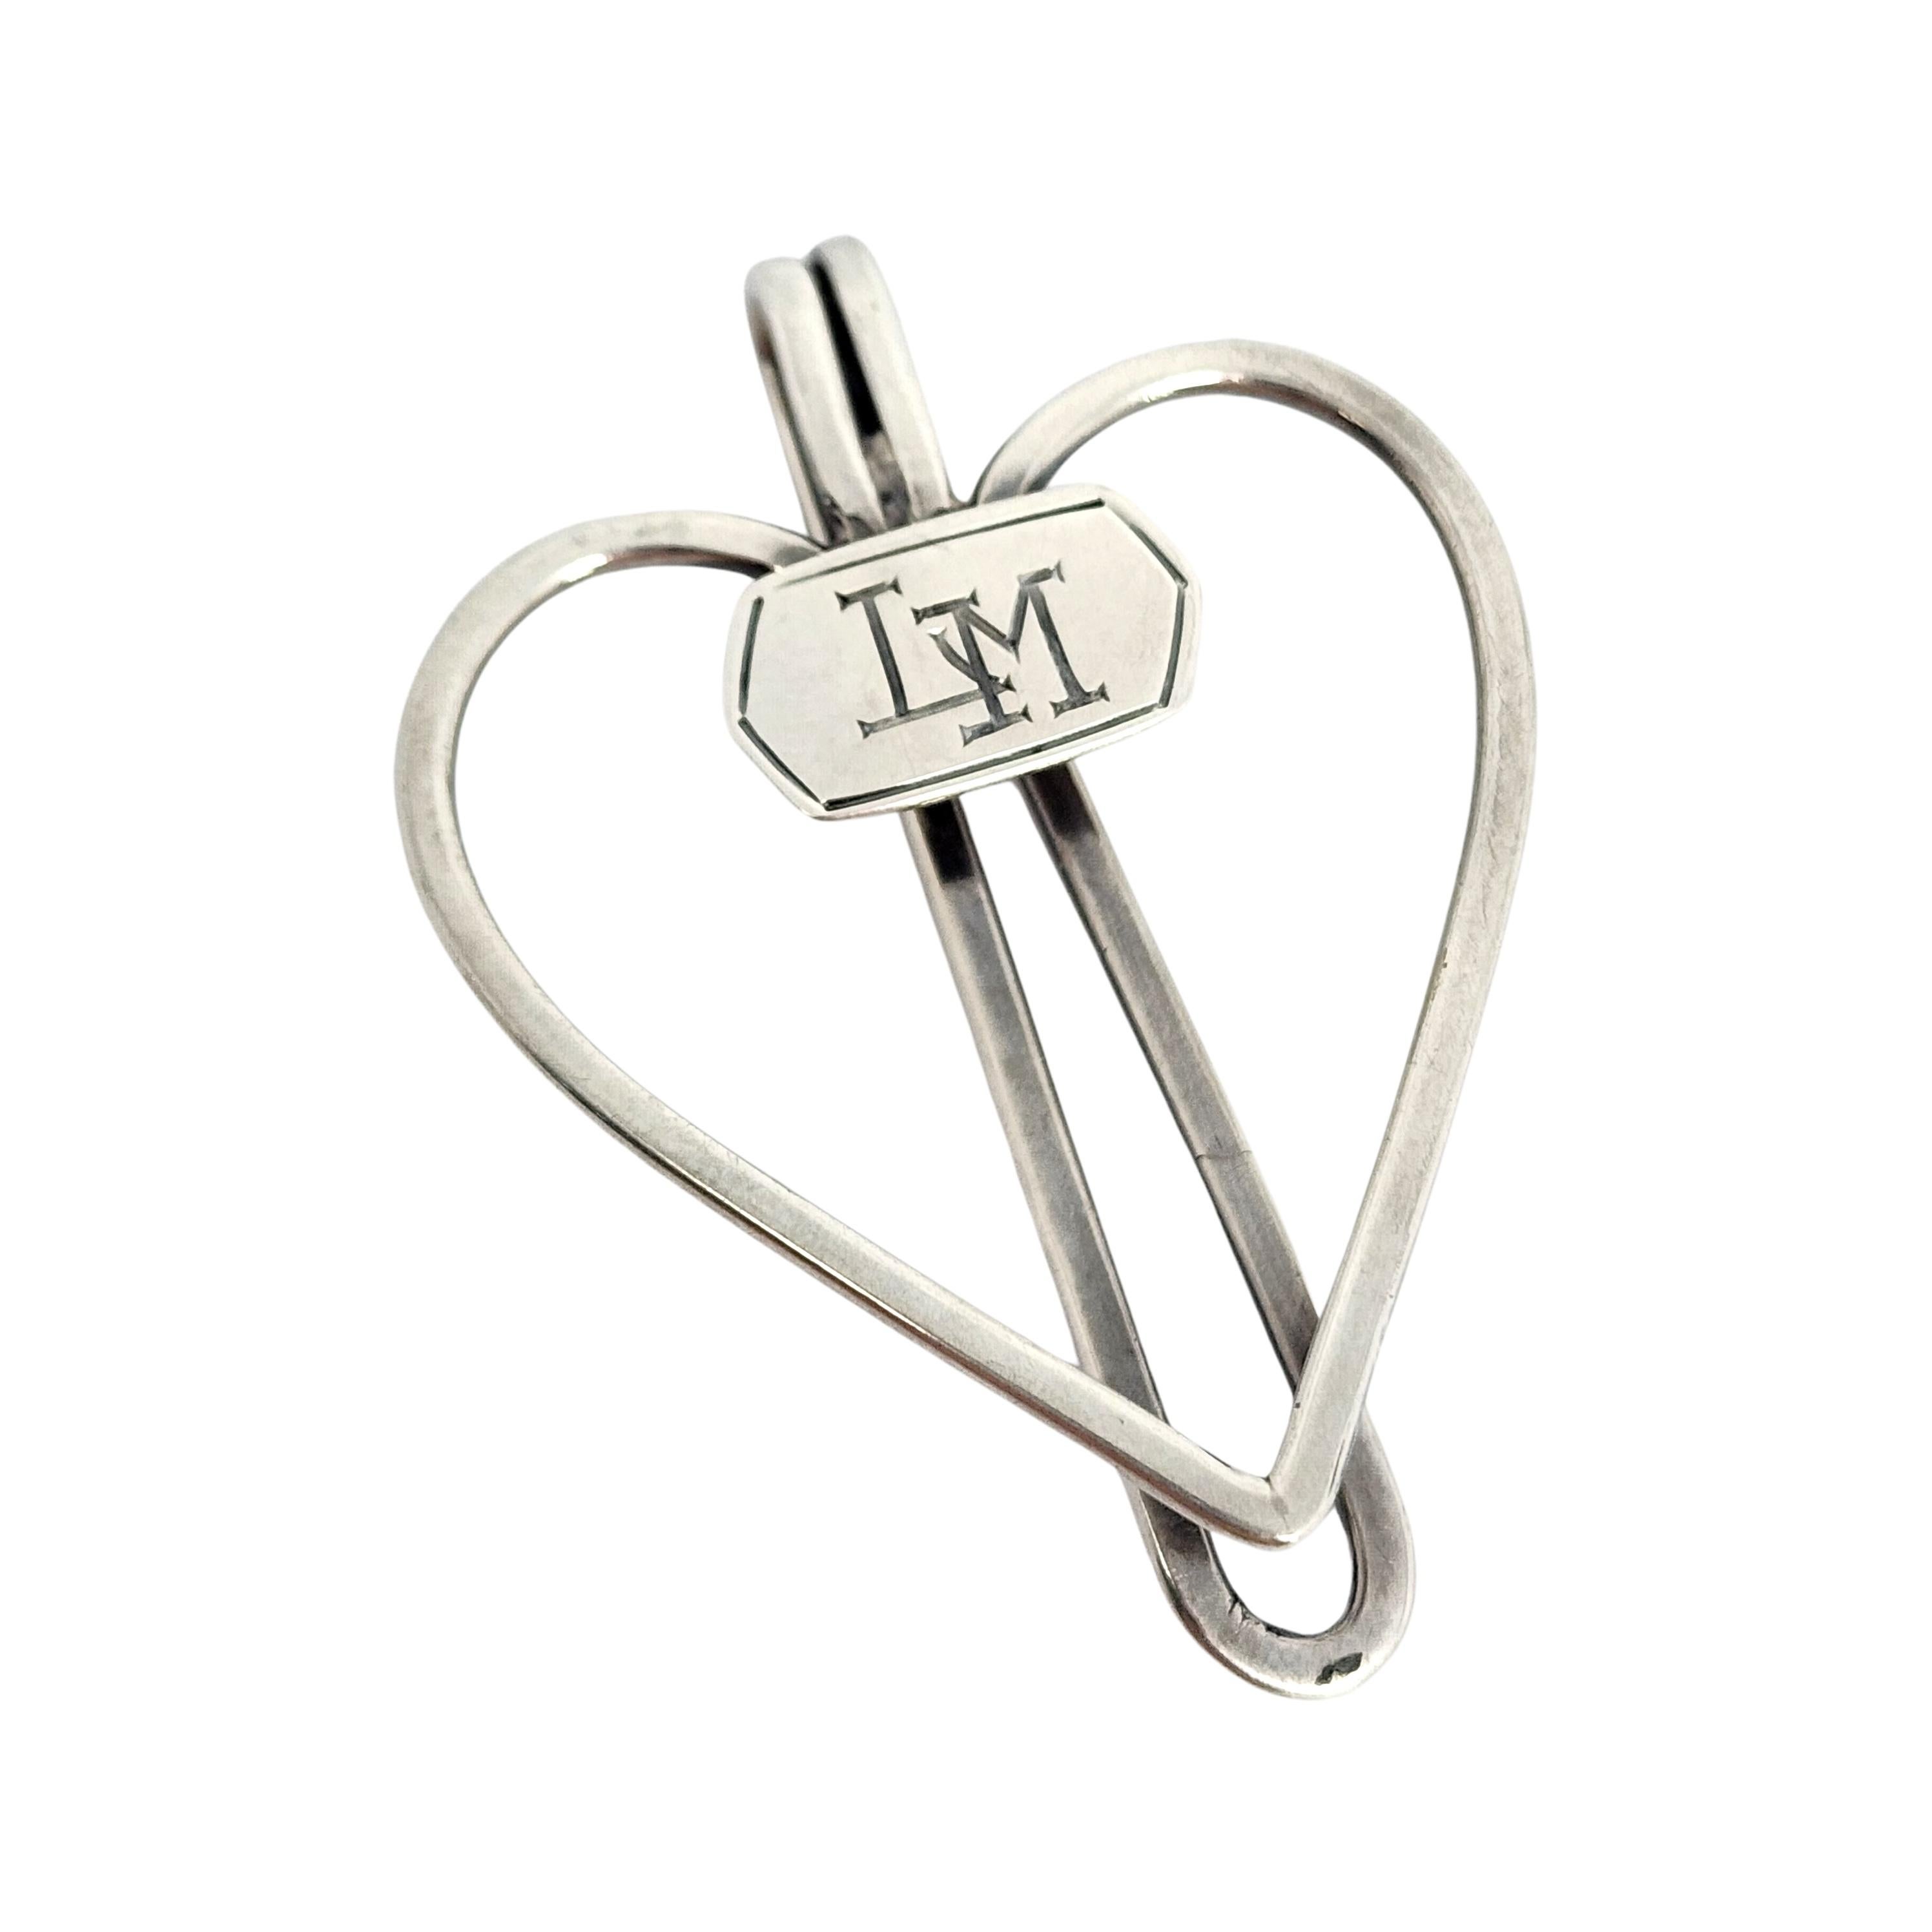 Sterling silver napkin clip by James E Blake, with monogram.

Monogram appears to be LM.

This napkin clip features an open heart design with a monogram at the center.

Measures approx 2 1/4